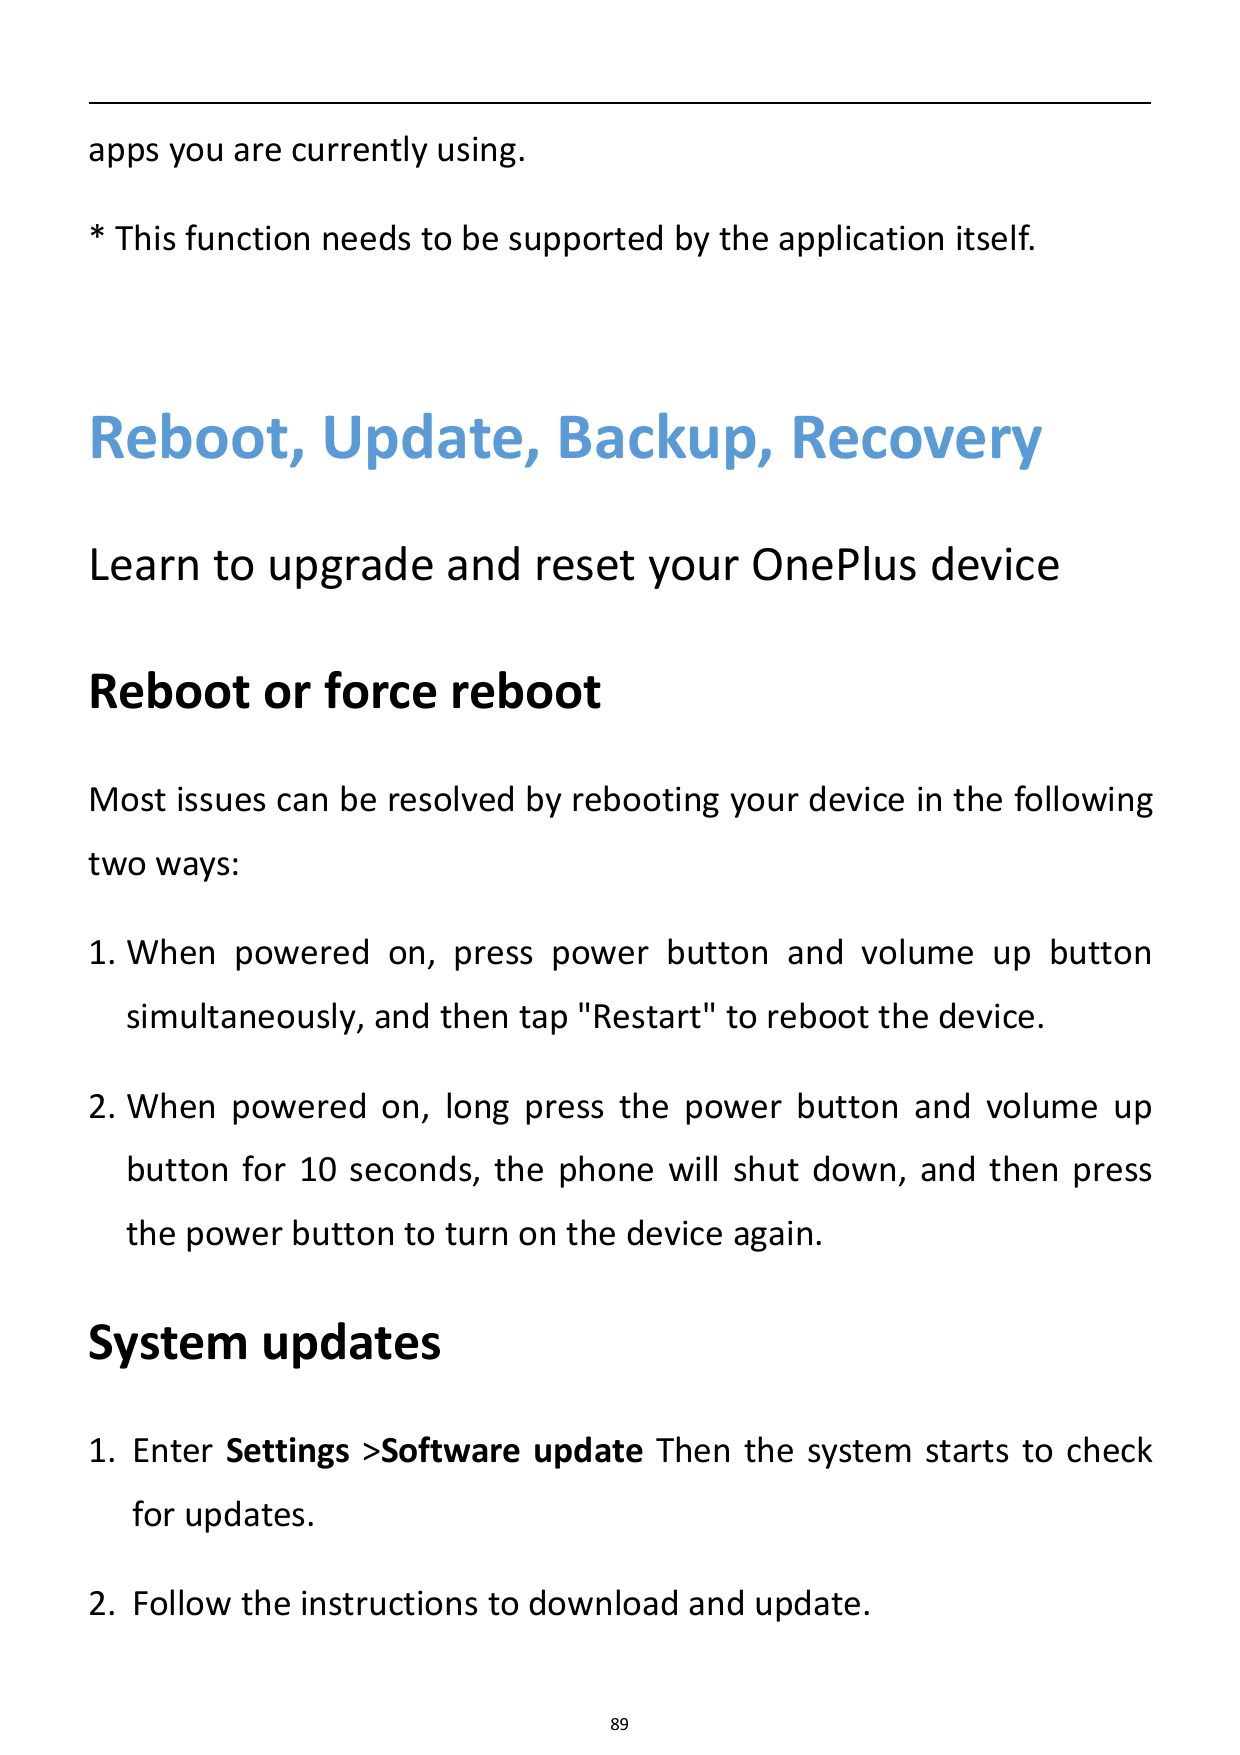 apps you are currently using.* This function needs to be supported by the application itself.Reboot, Update, Backup, RecoveryLea